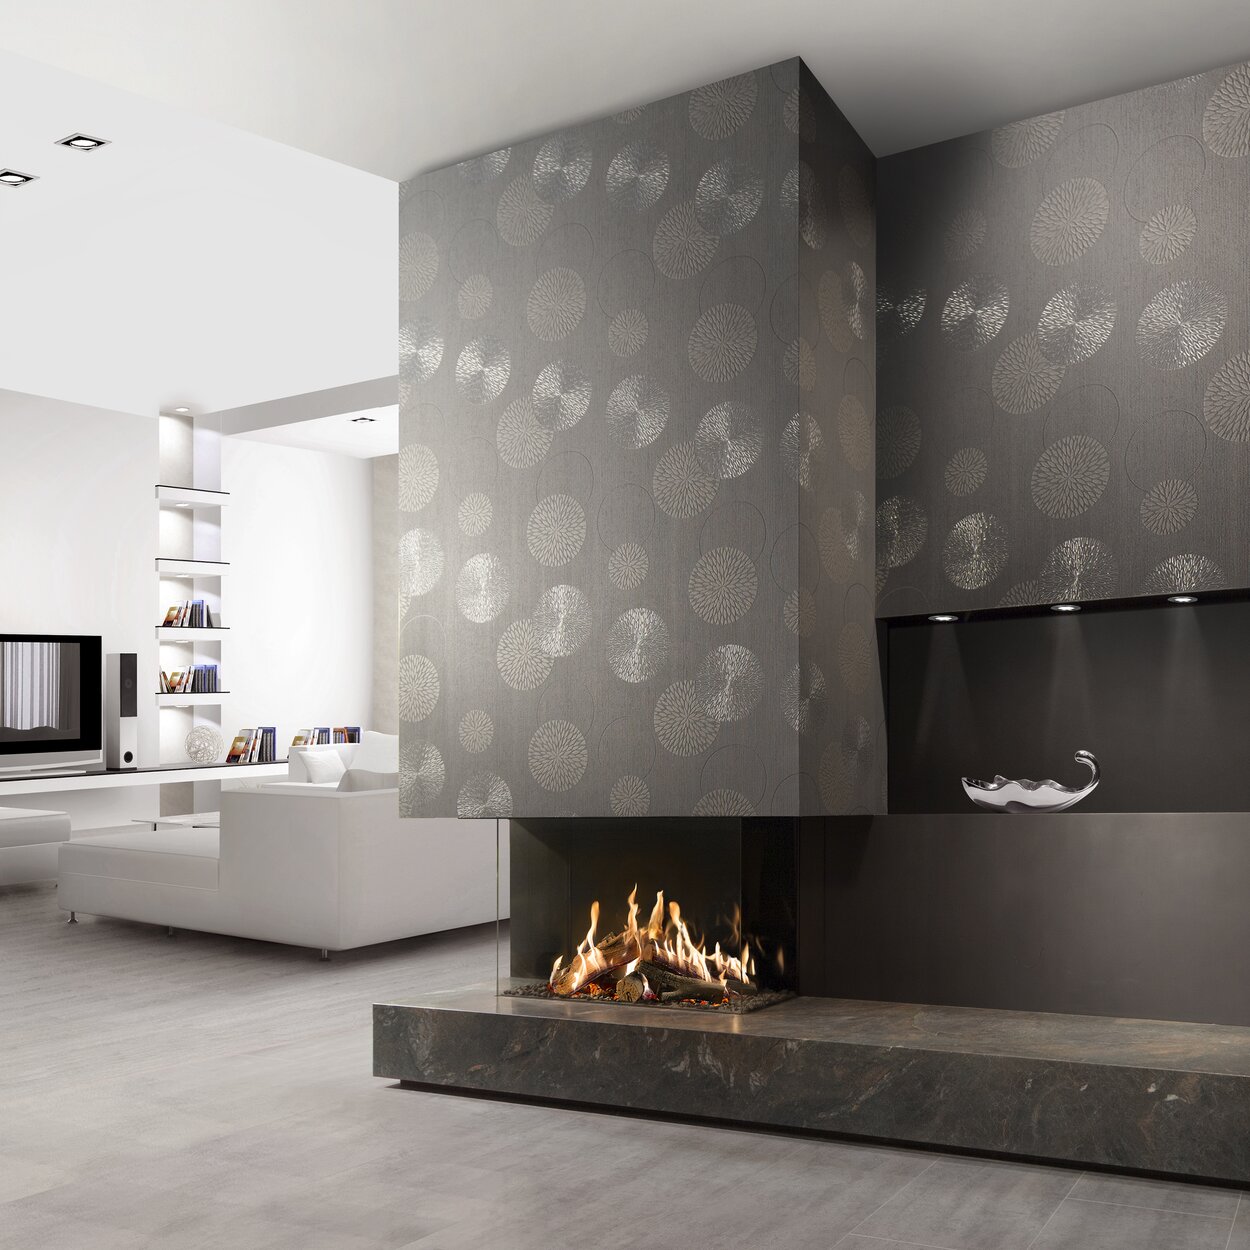 GP85/55S gas fireplace with grey cladding in a modern living room with white walls